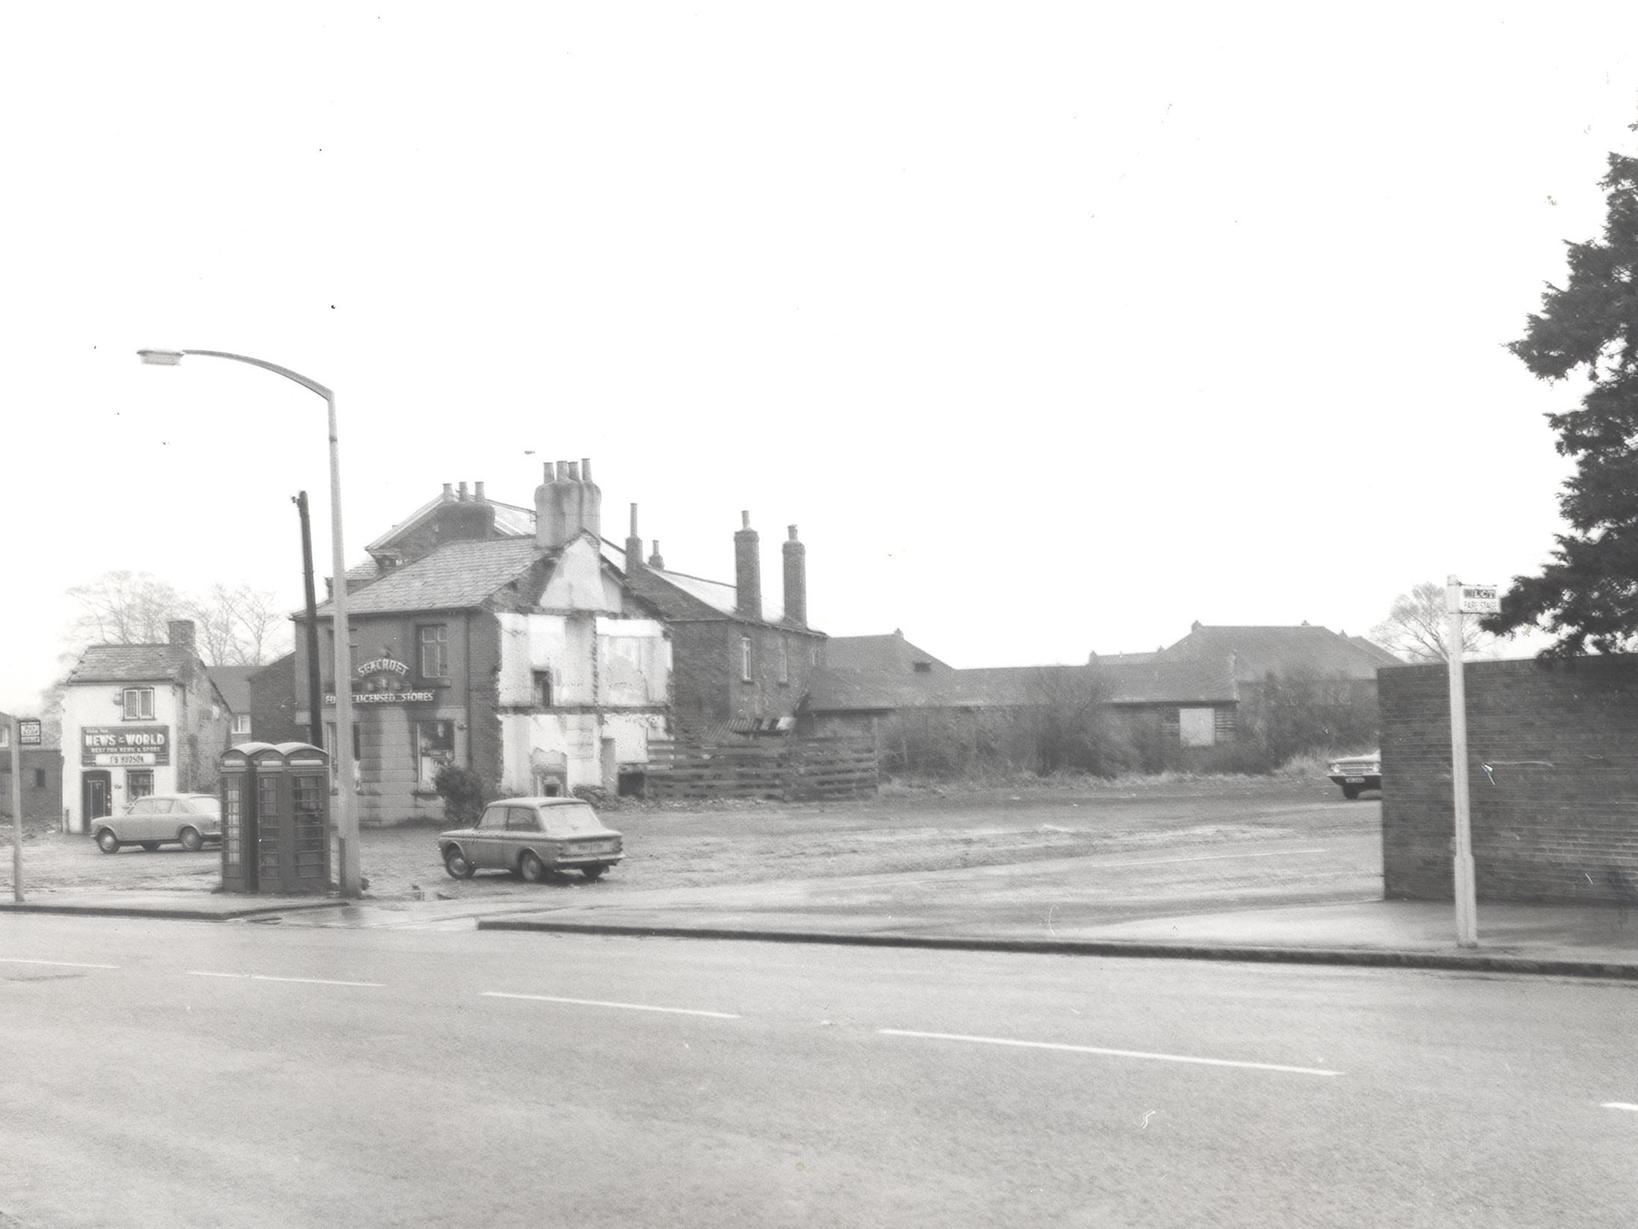 Cottages had been demolished to make way for Leeds Corporation's planned redevelopment of Seacroft. The two shops were also due to be demolished and replaced.